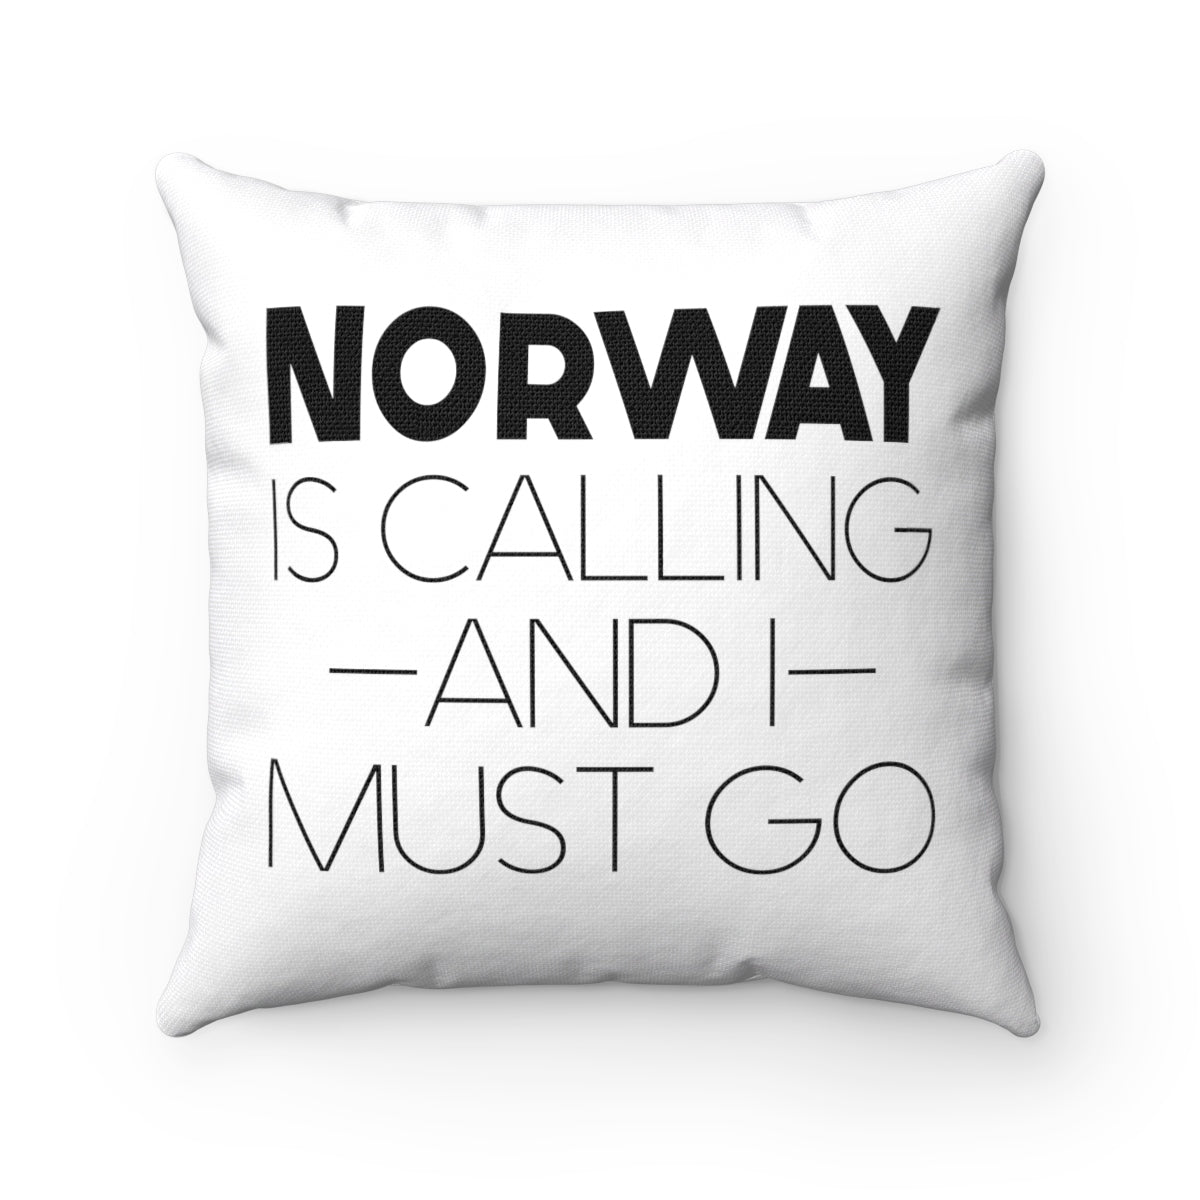 Norway Is Calling And I Must Go Square Pillow Cover Scandinavian Design Studio